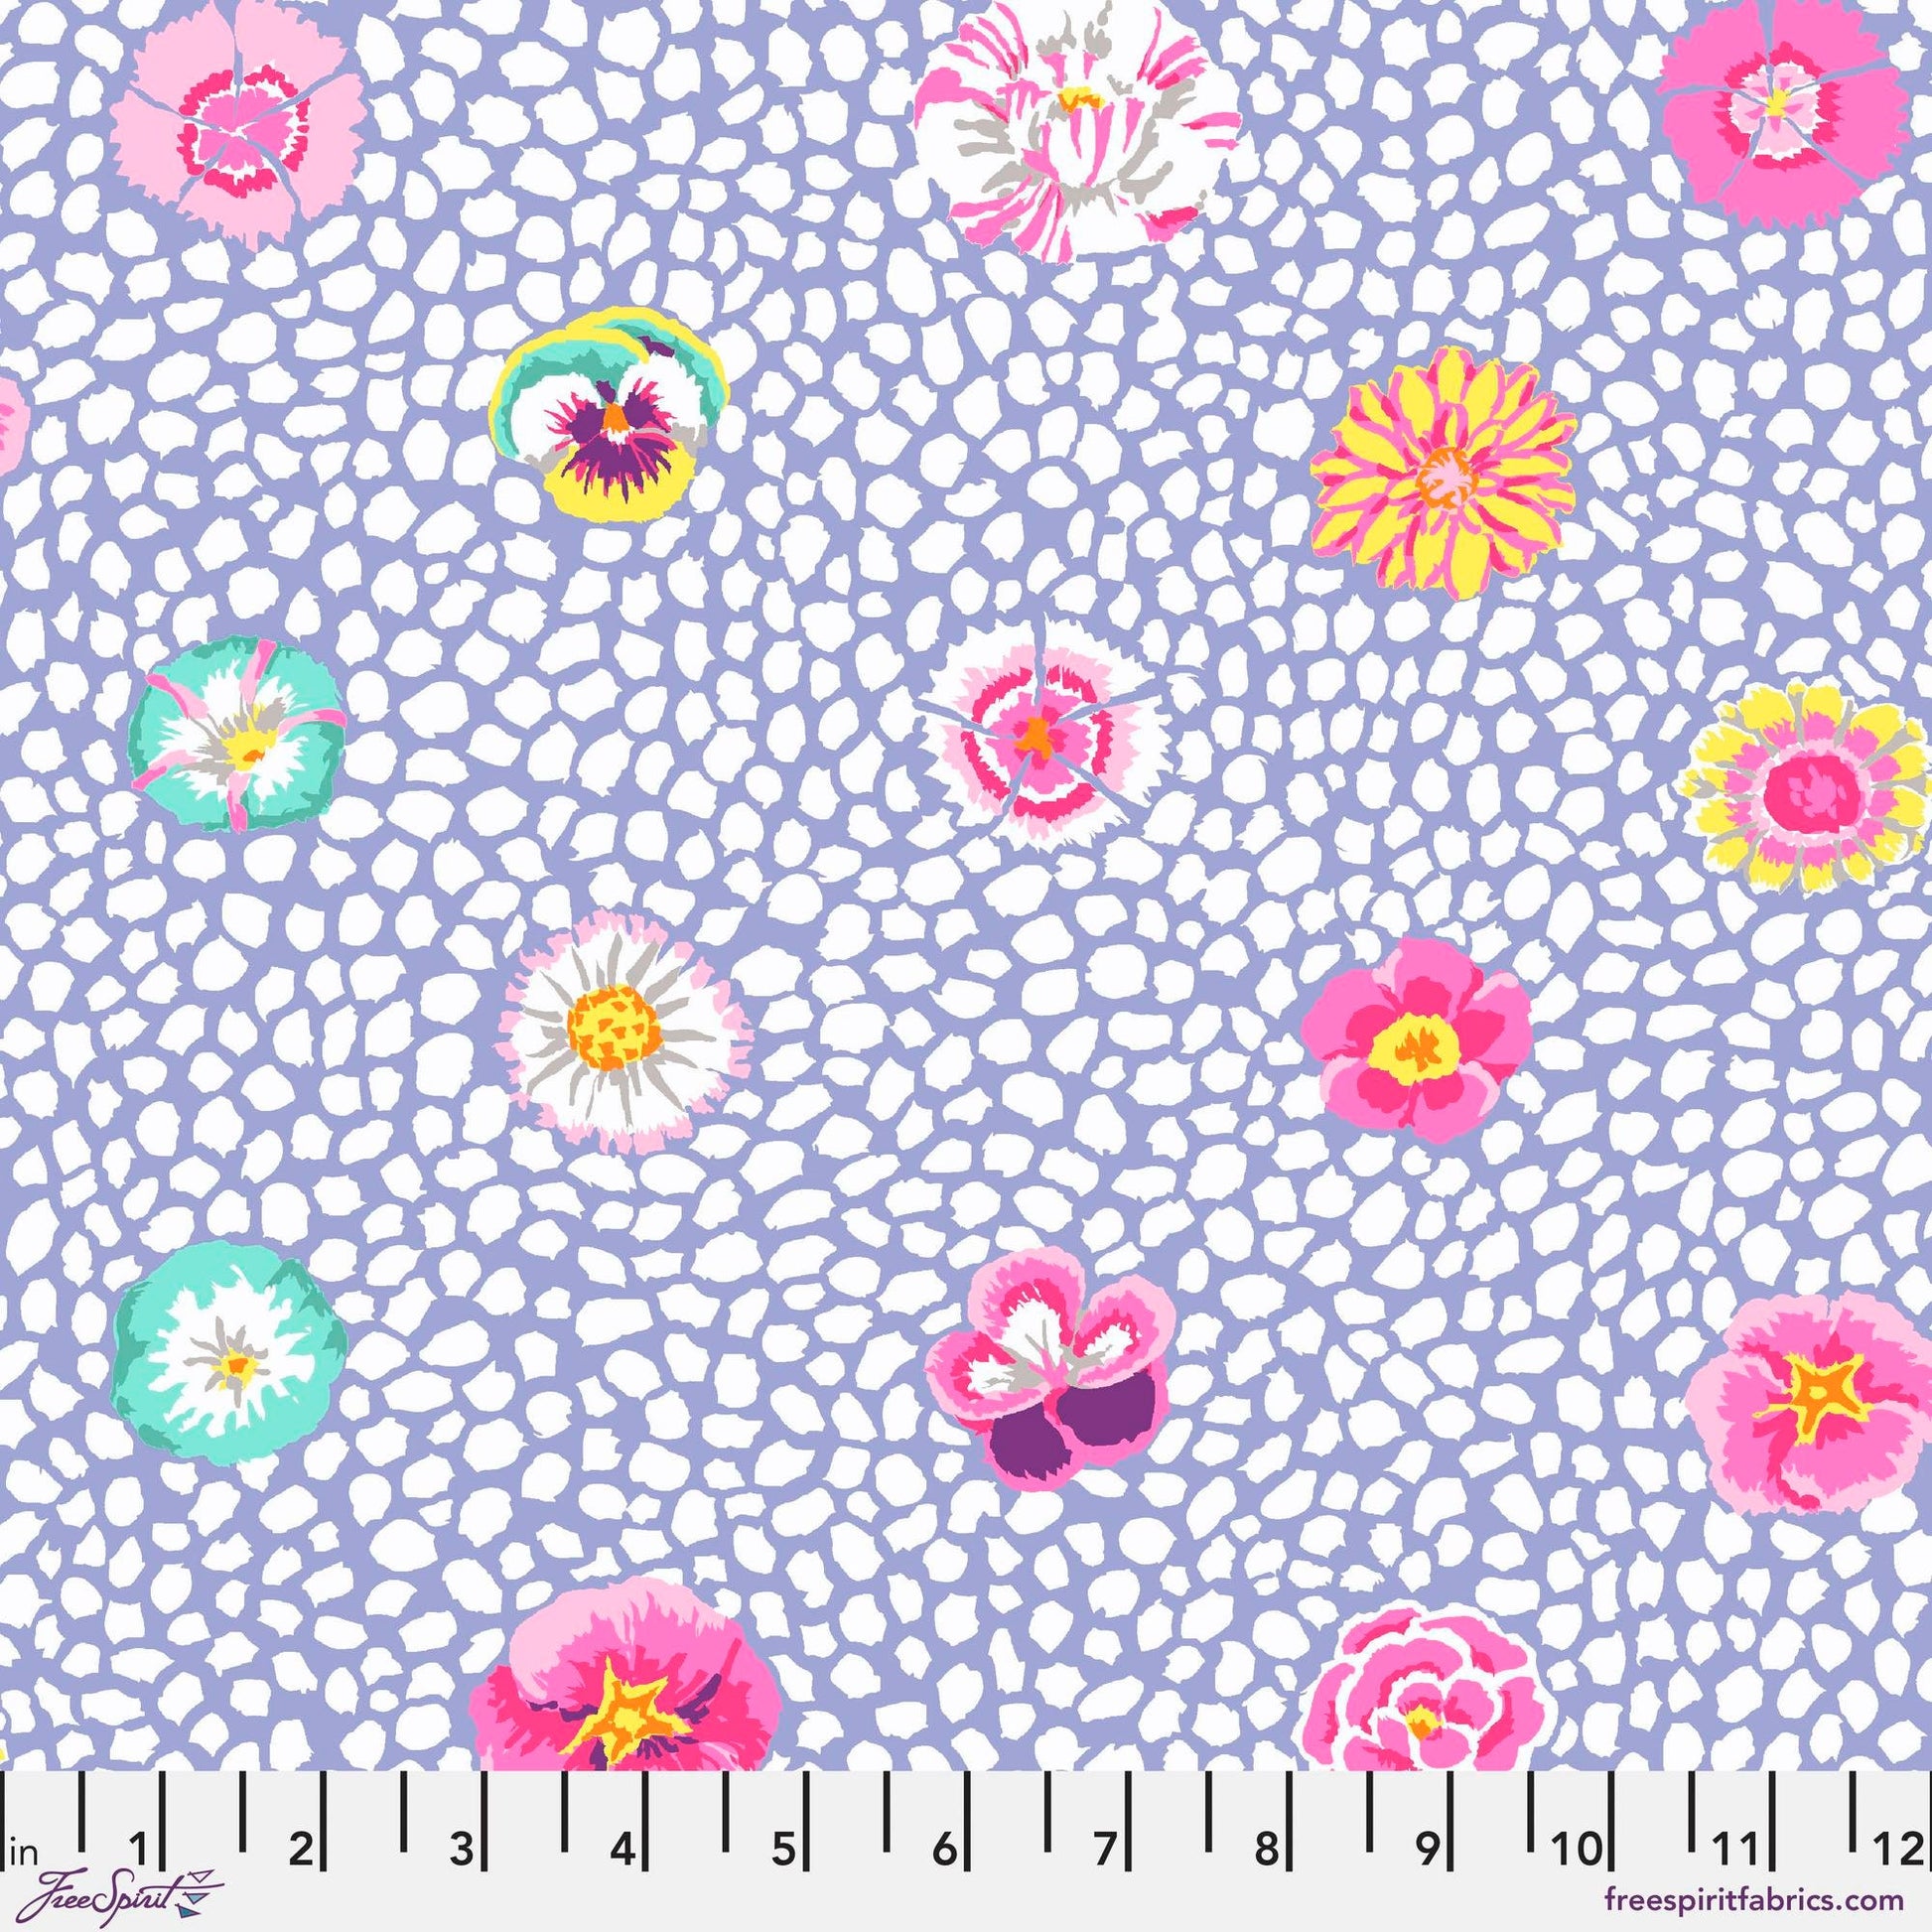 Guinea Flower Lavender August 2022 Kaffe Fassett Collective 100% Quilters Cotton Fabric Fetish